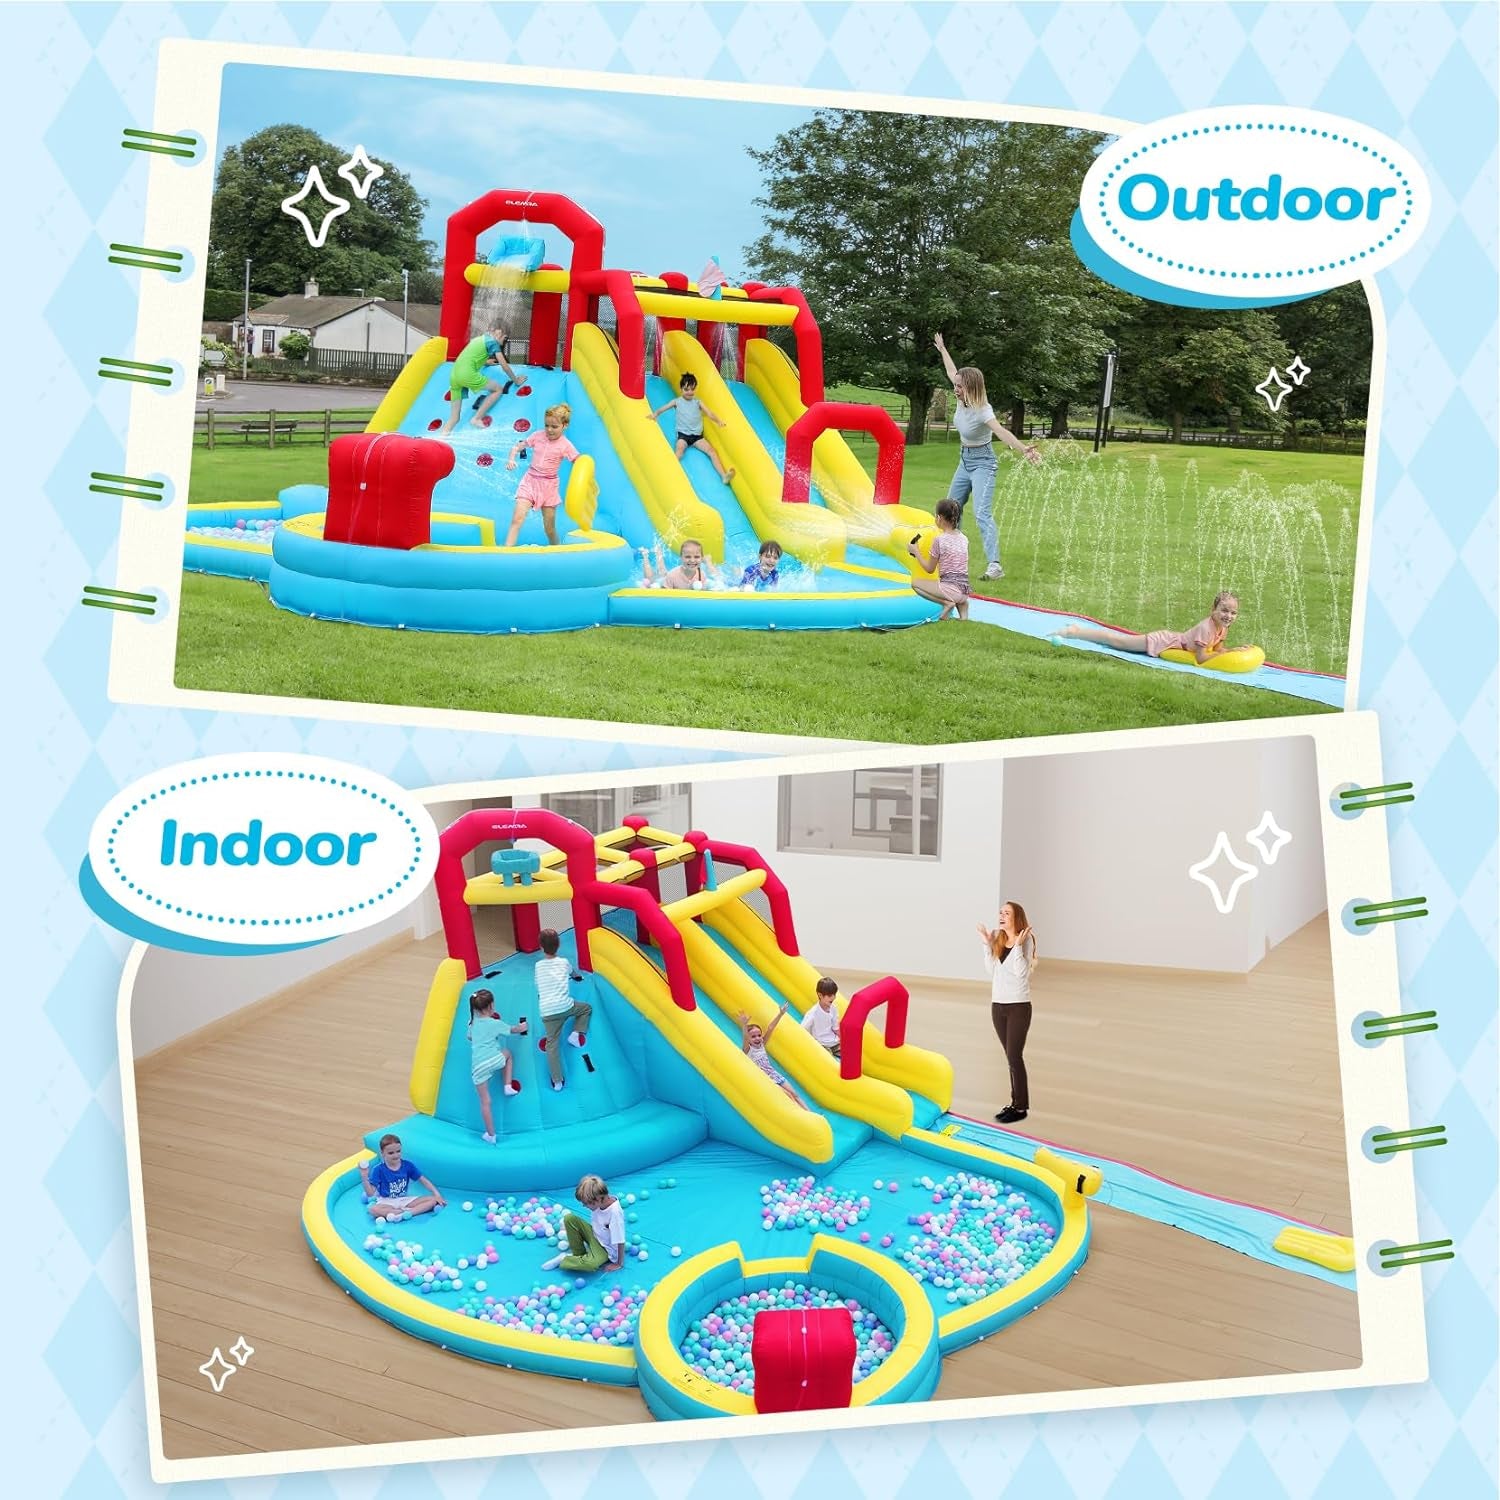 XL Inflatable Water Slides for Kids Backyard,Giant Water Park with Long Slip Splash and Slide,Double Slides for Kids and Adults with 750W Blower,Climbing Wall,Deep Pool,Water Canon for Outdoor